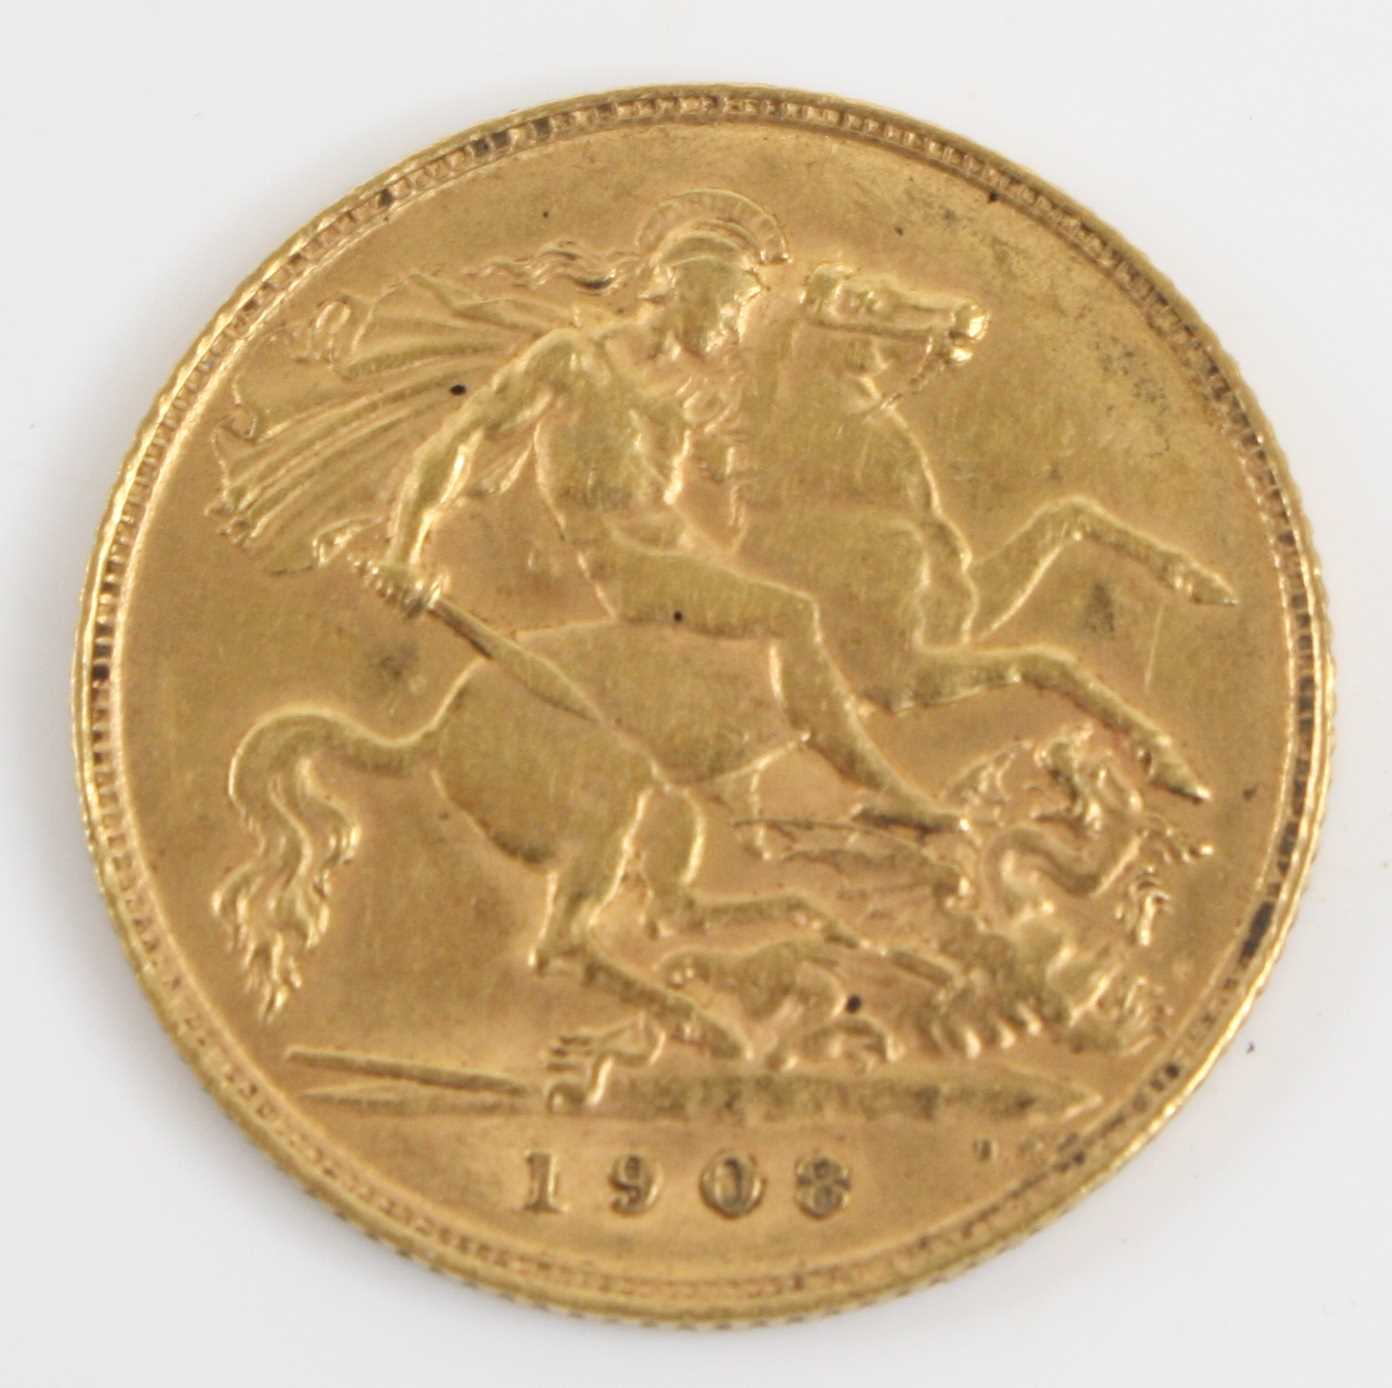 Great Britain, 1908 gold half sovereign, Edward VII, rev: St George and Dragon above date. (1) - Image 2 of 2